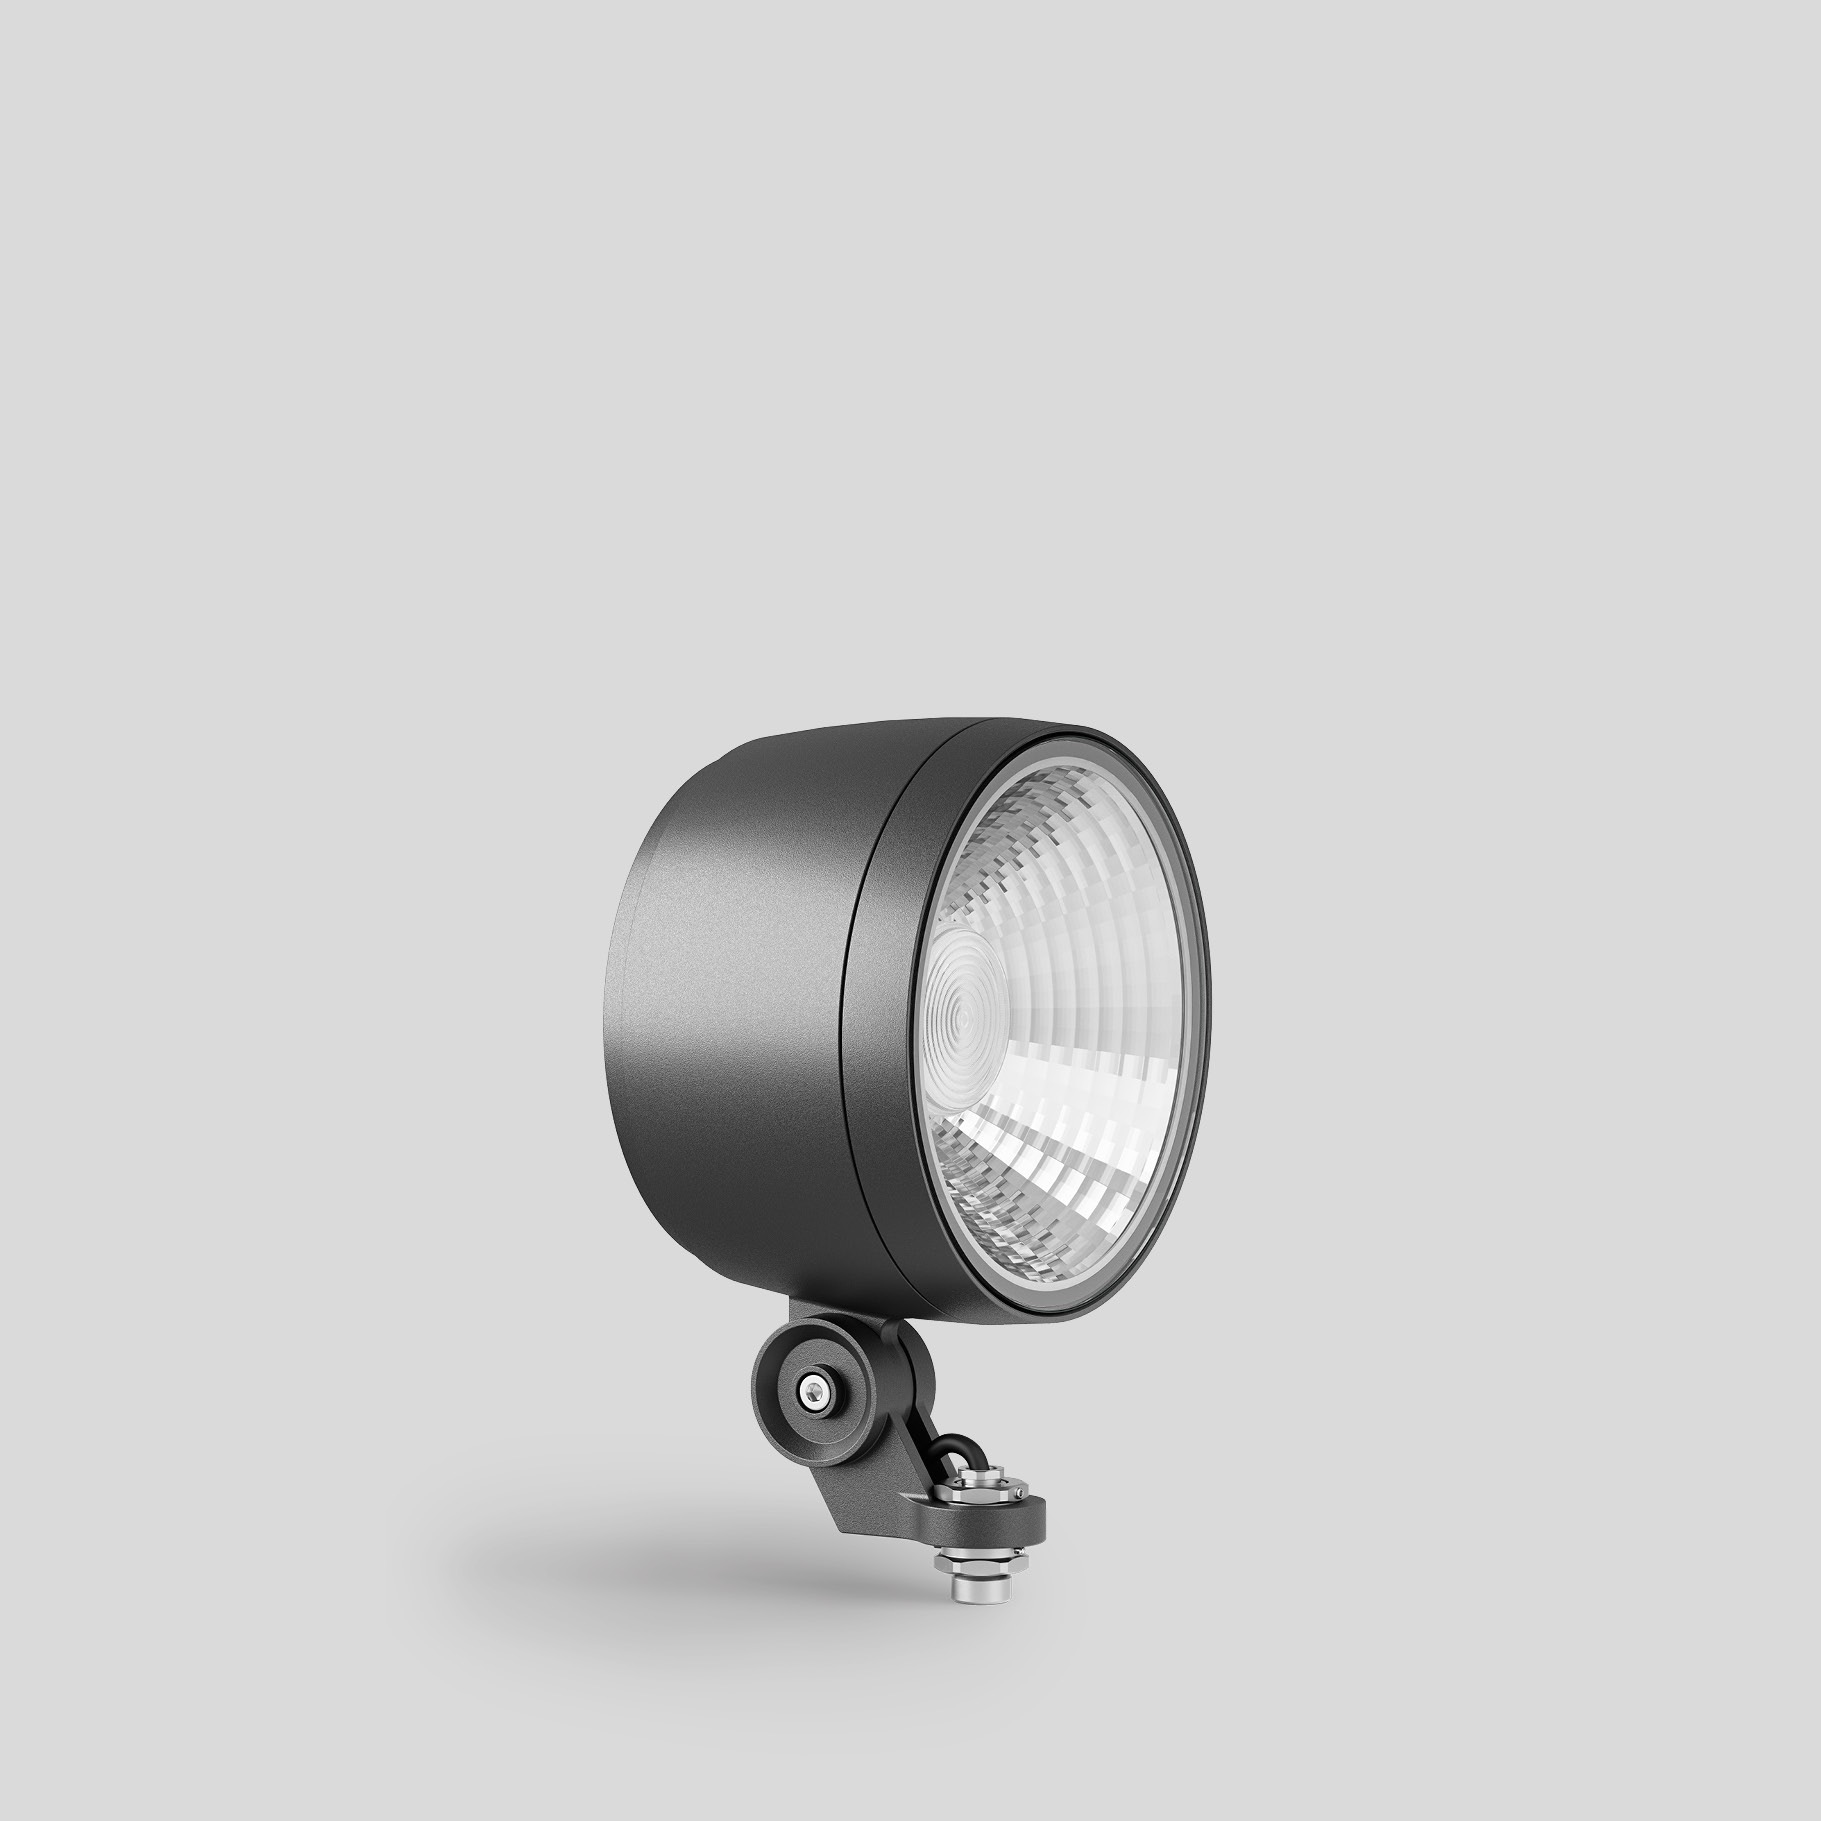 Recessed Shielded Light Wall Luminaire